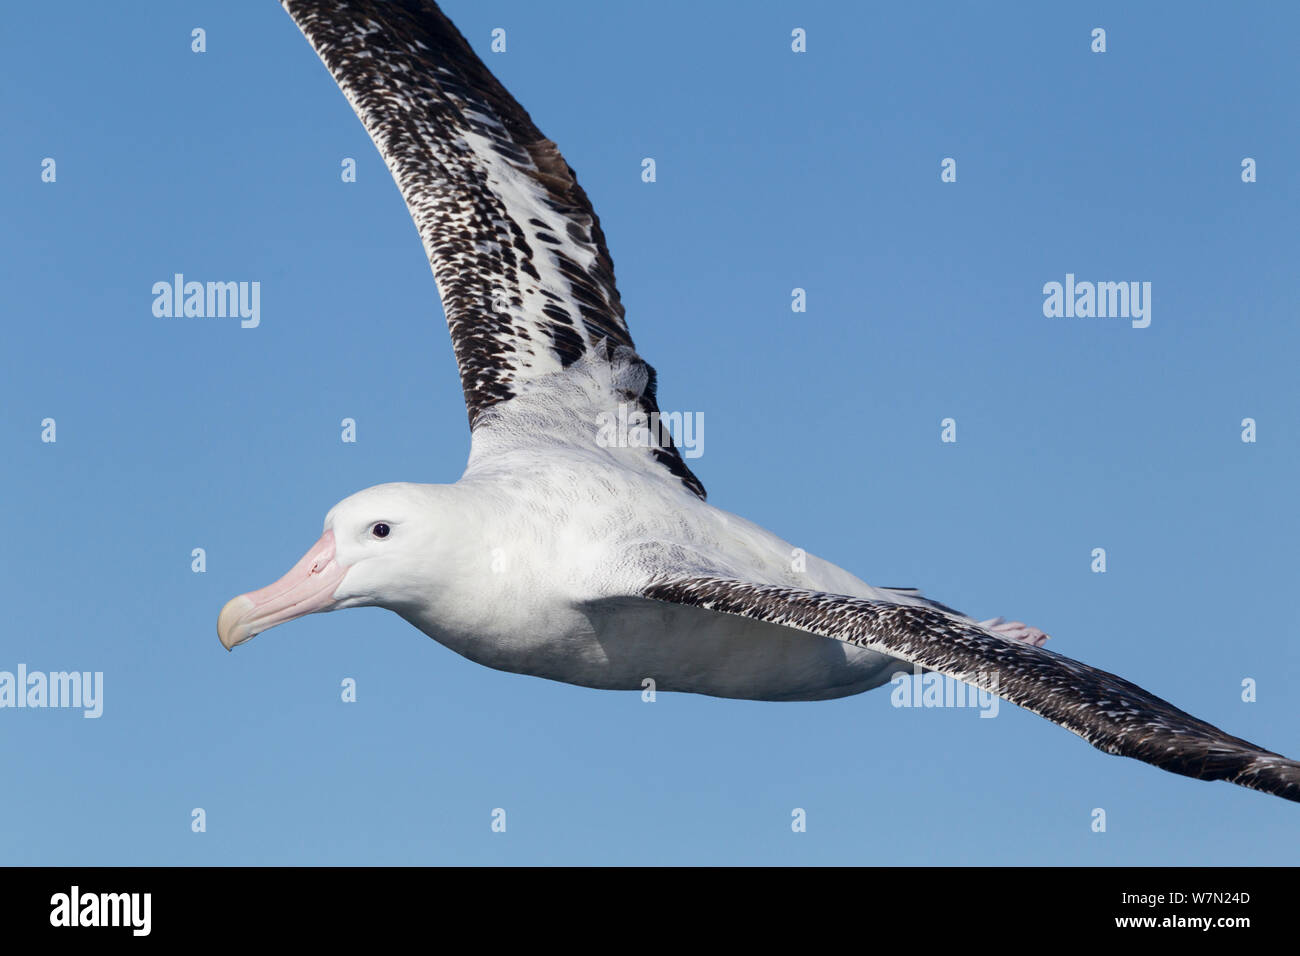 New Zealand albatross (Diomedea antipodensis) in flight against a blue sky, off Kaikoura, Canterbury, New Zealand. Stock Photo